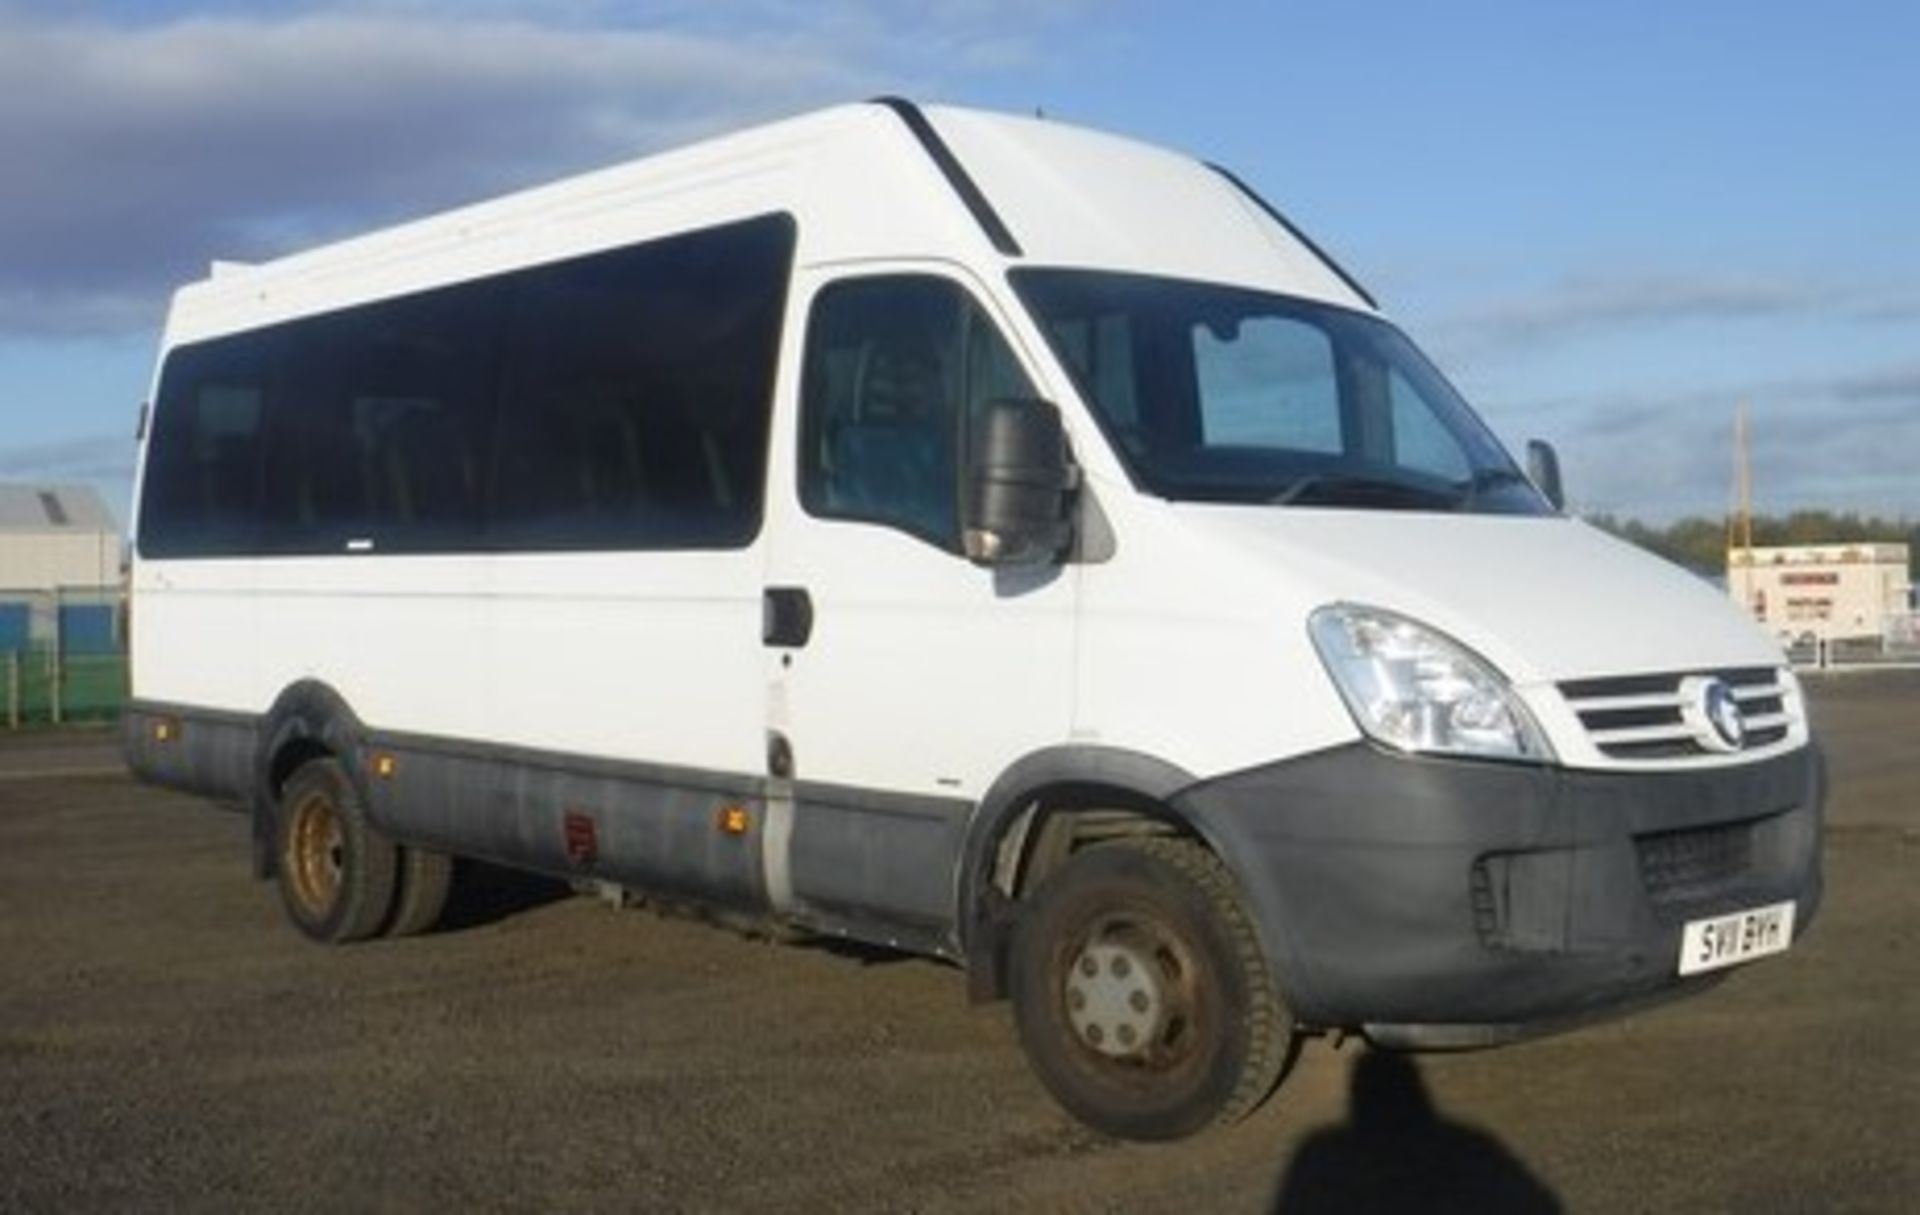 IVECO DAILY - 2998cc - Image 12 of 18